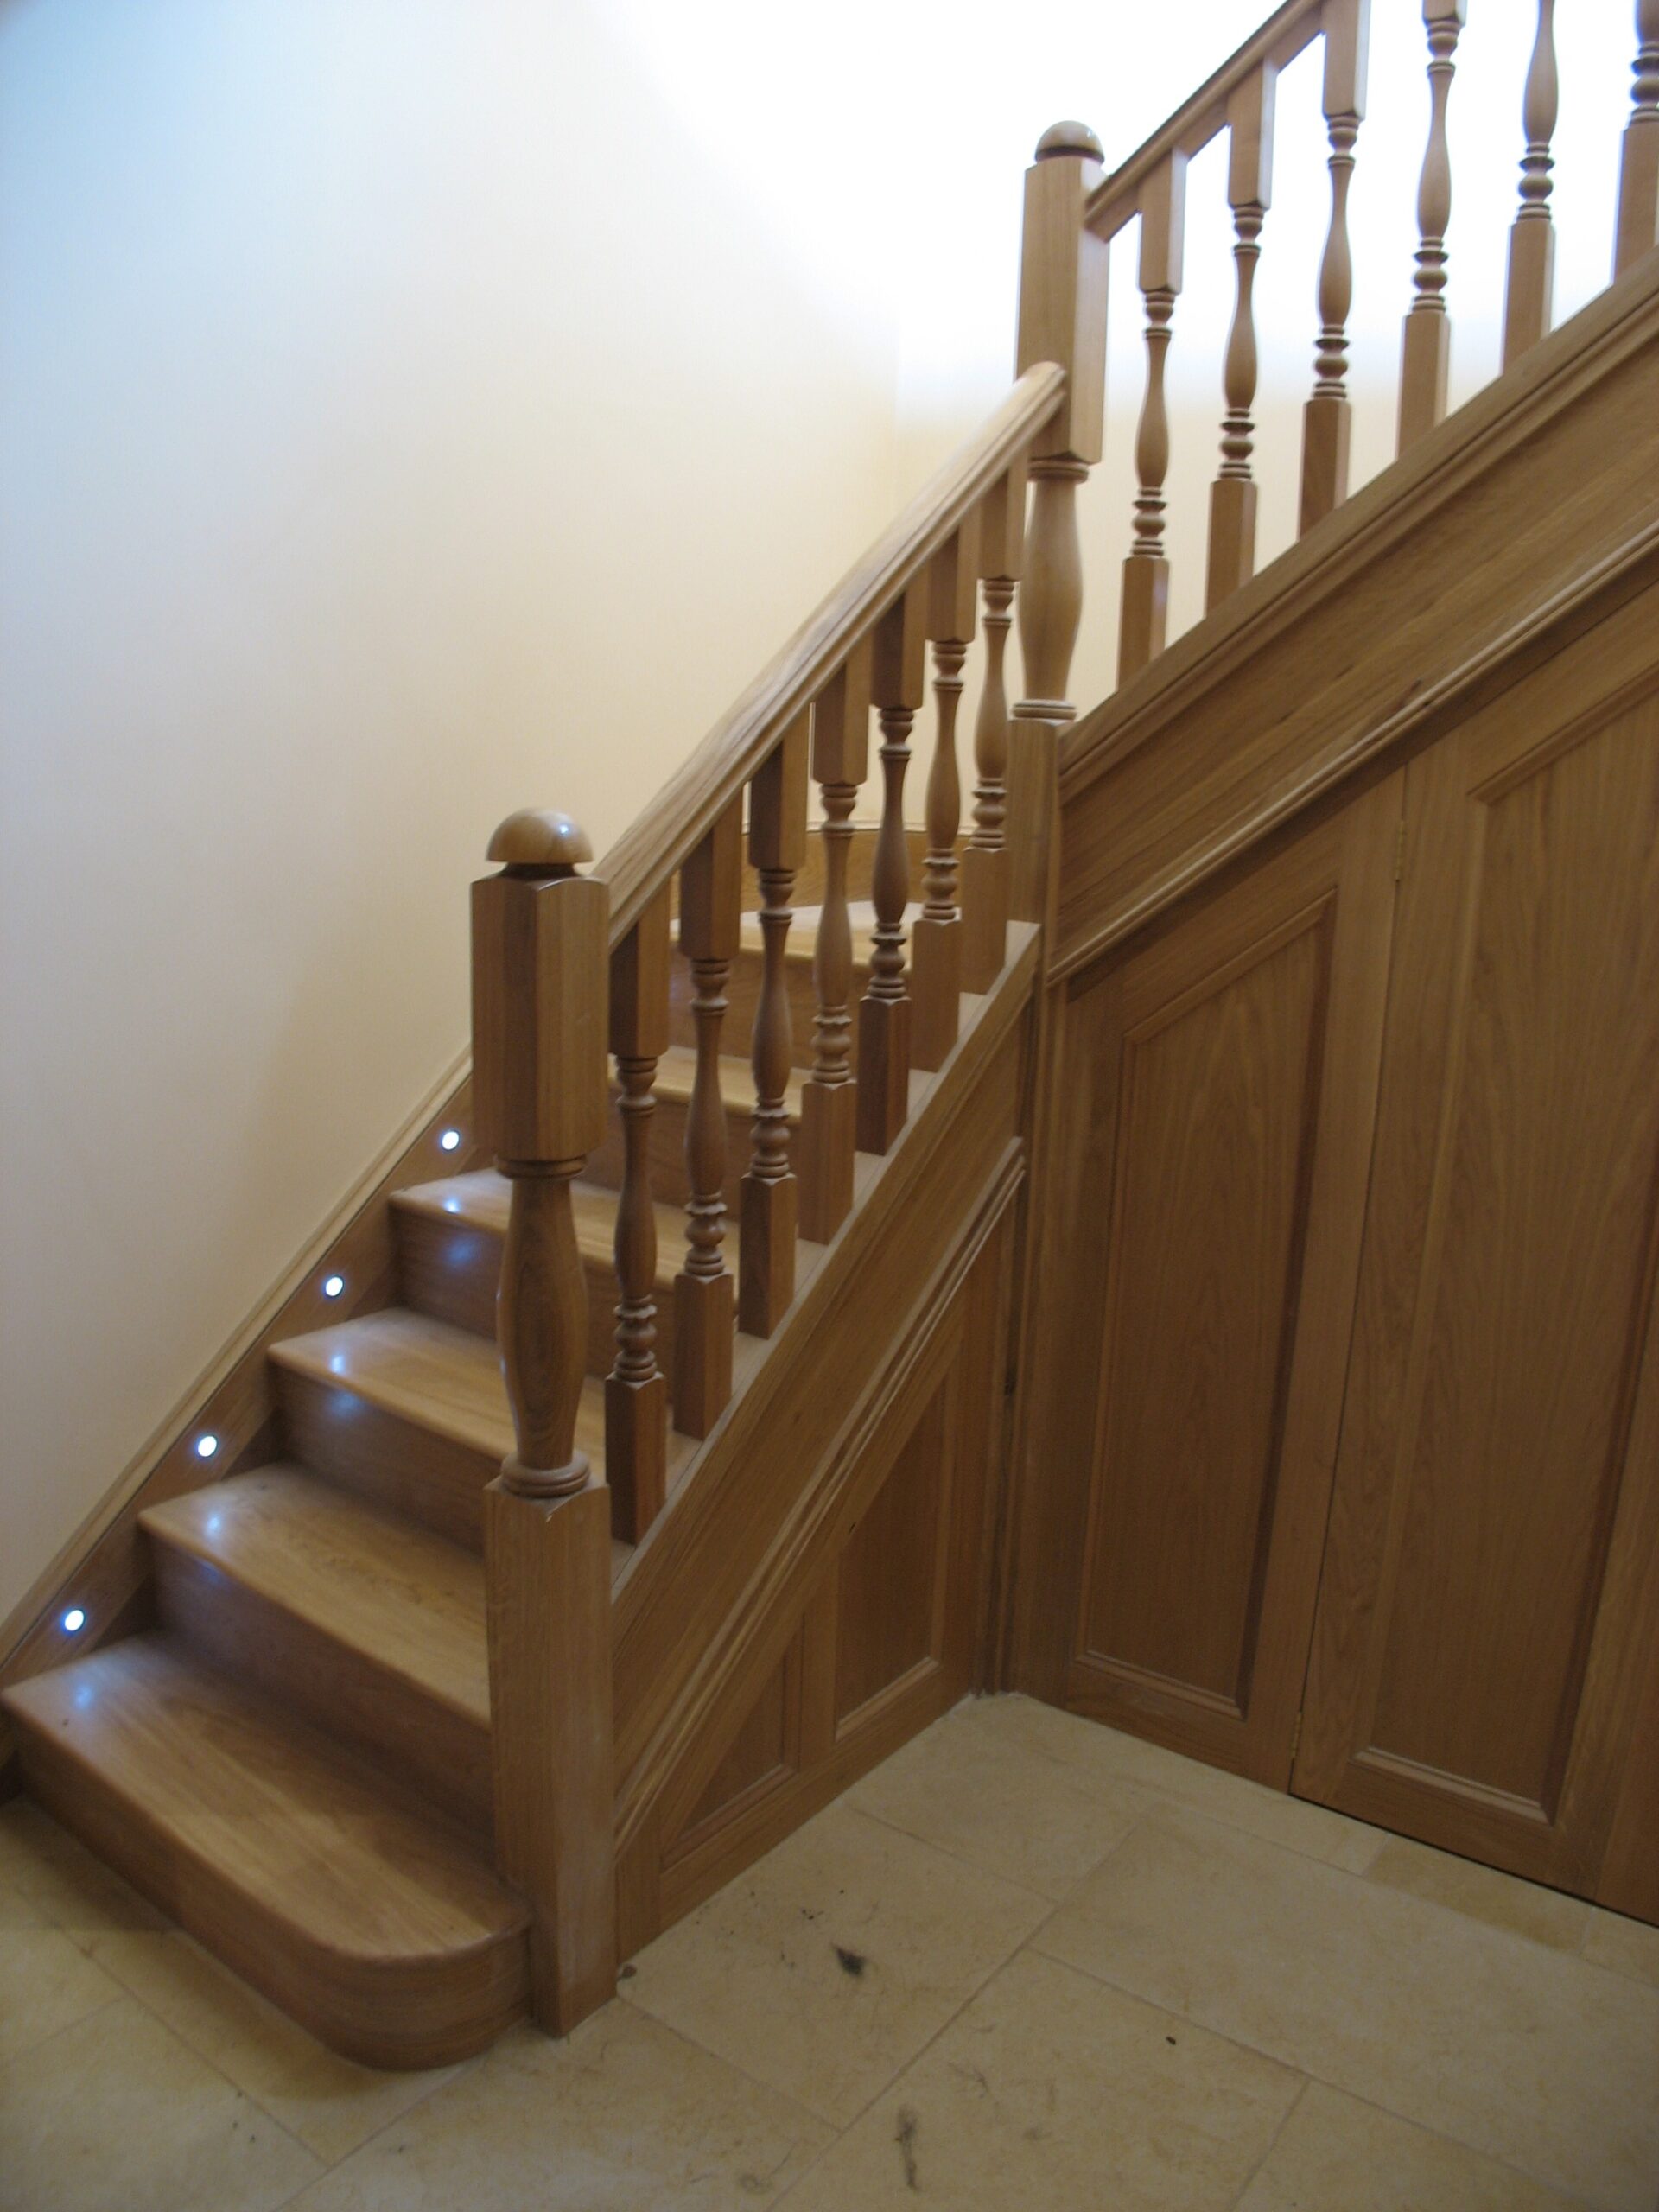 DBSJ - Oak with turned spindles